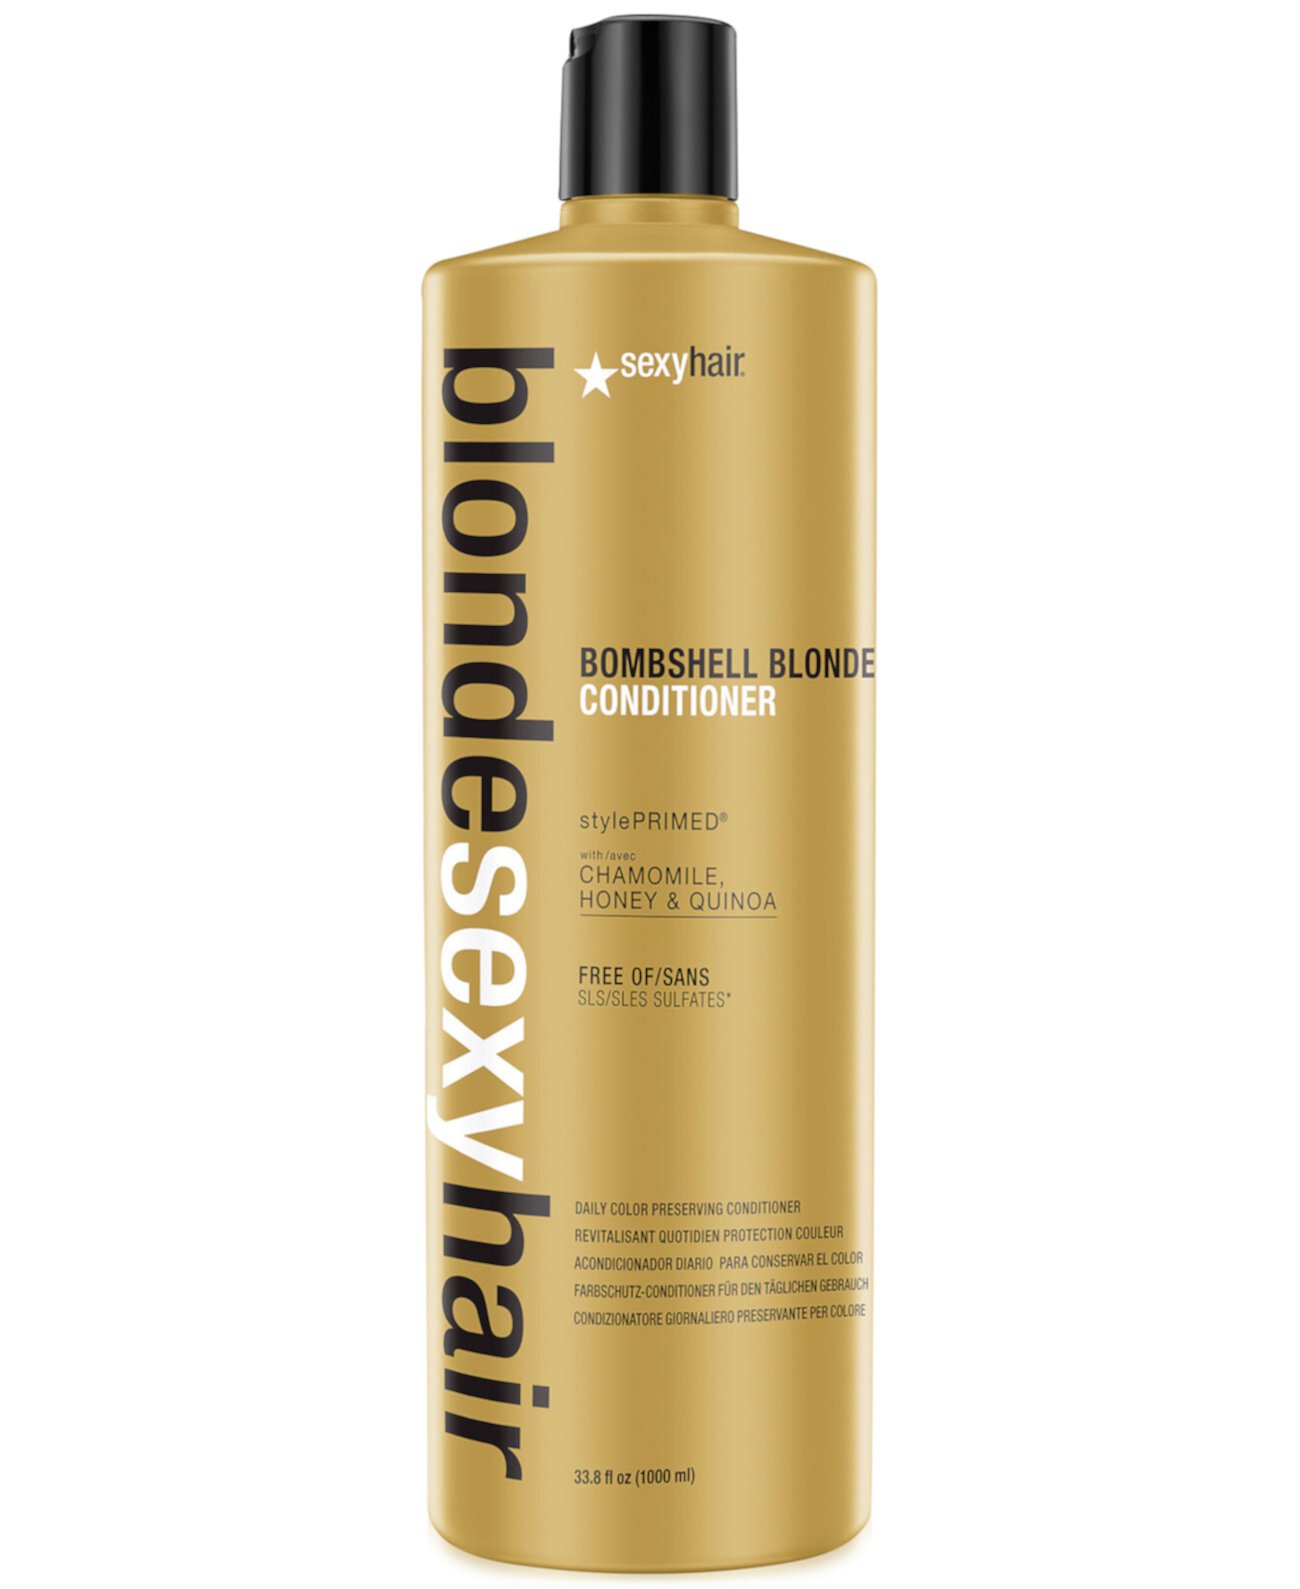 Blonde Sexy Hair Bombshell Blonde Daily Color Conserving Conditioner, 33,8 унции, от PUREBEAUTY Salon & Spa Sexy Hair